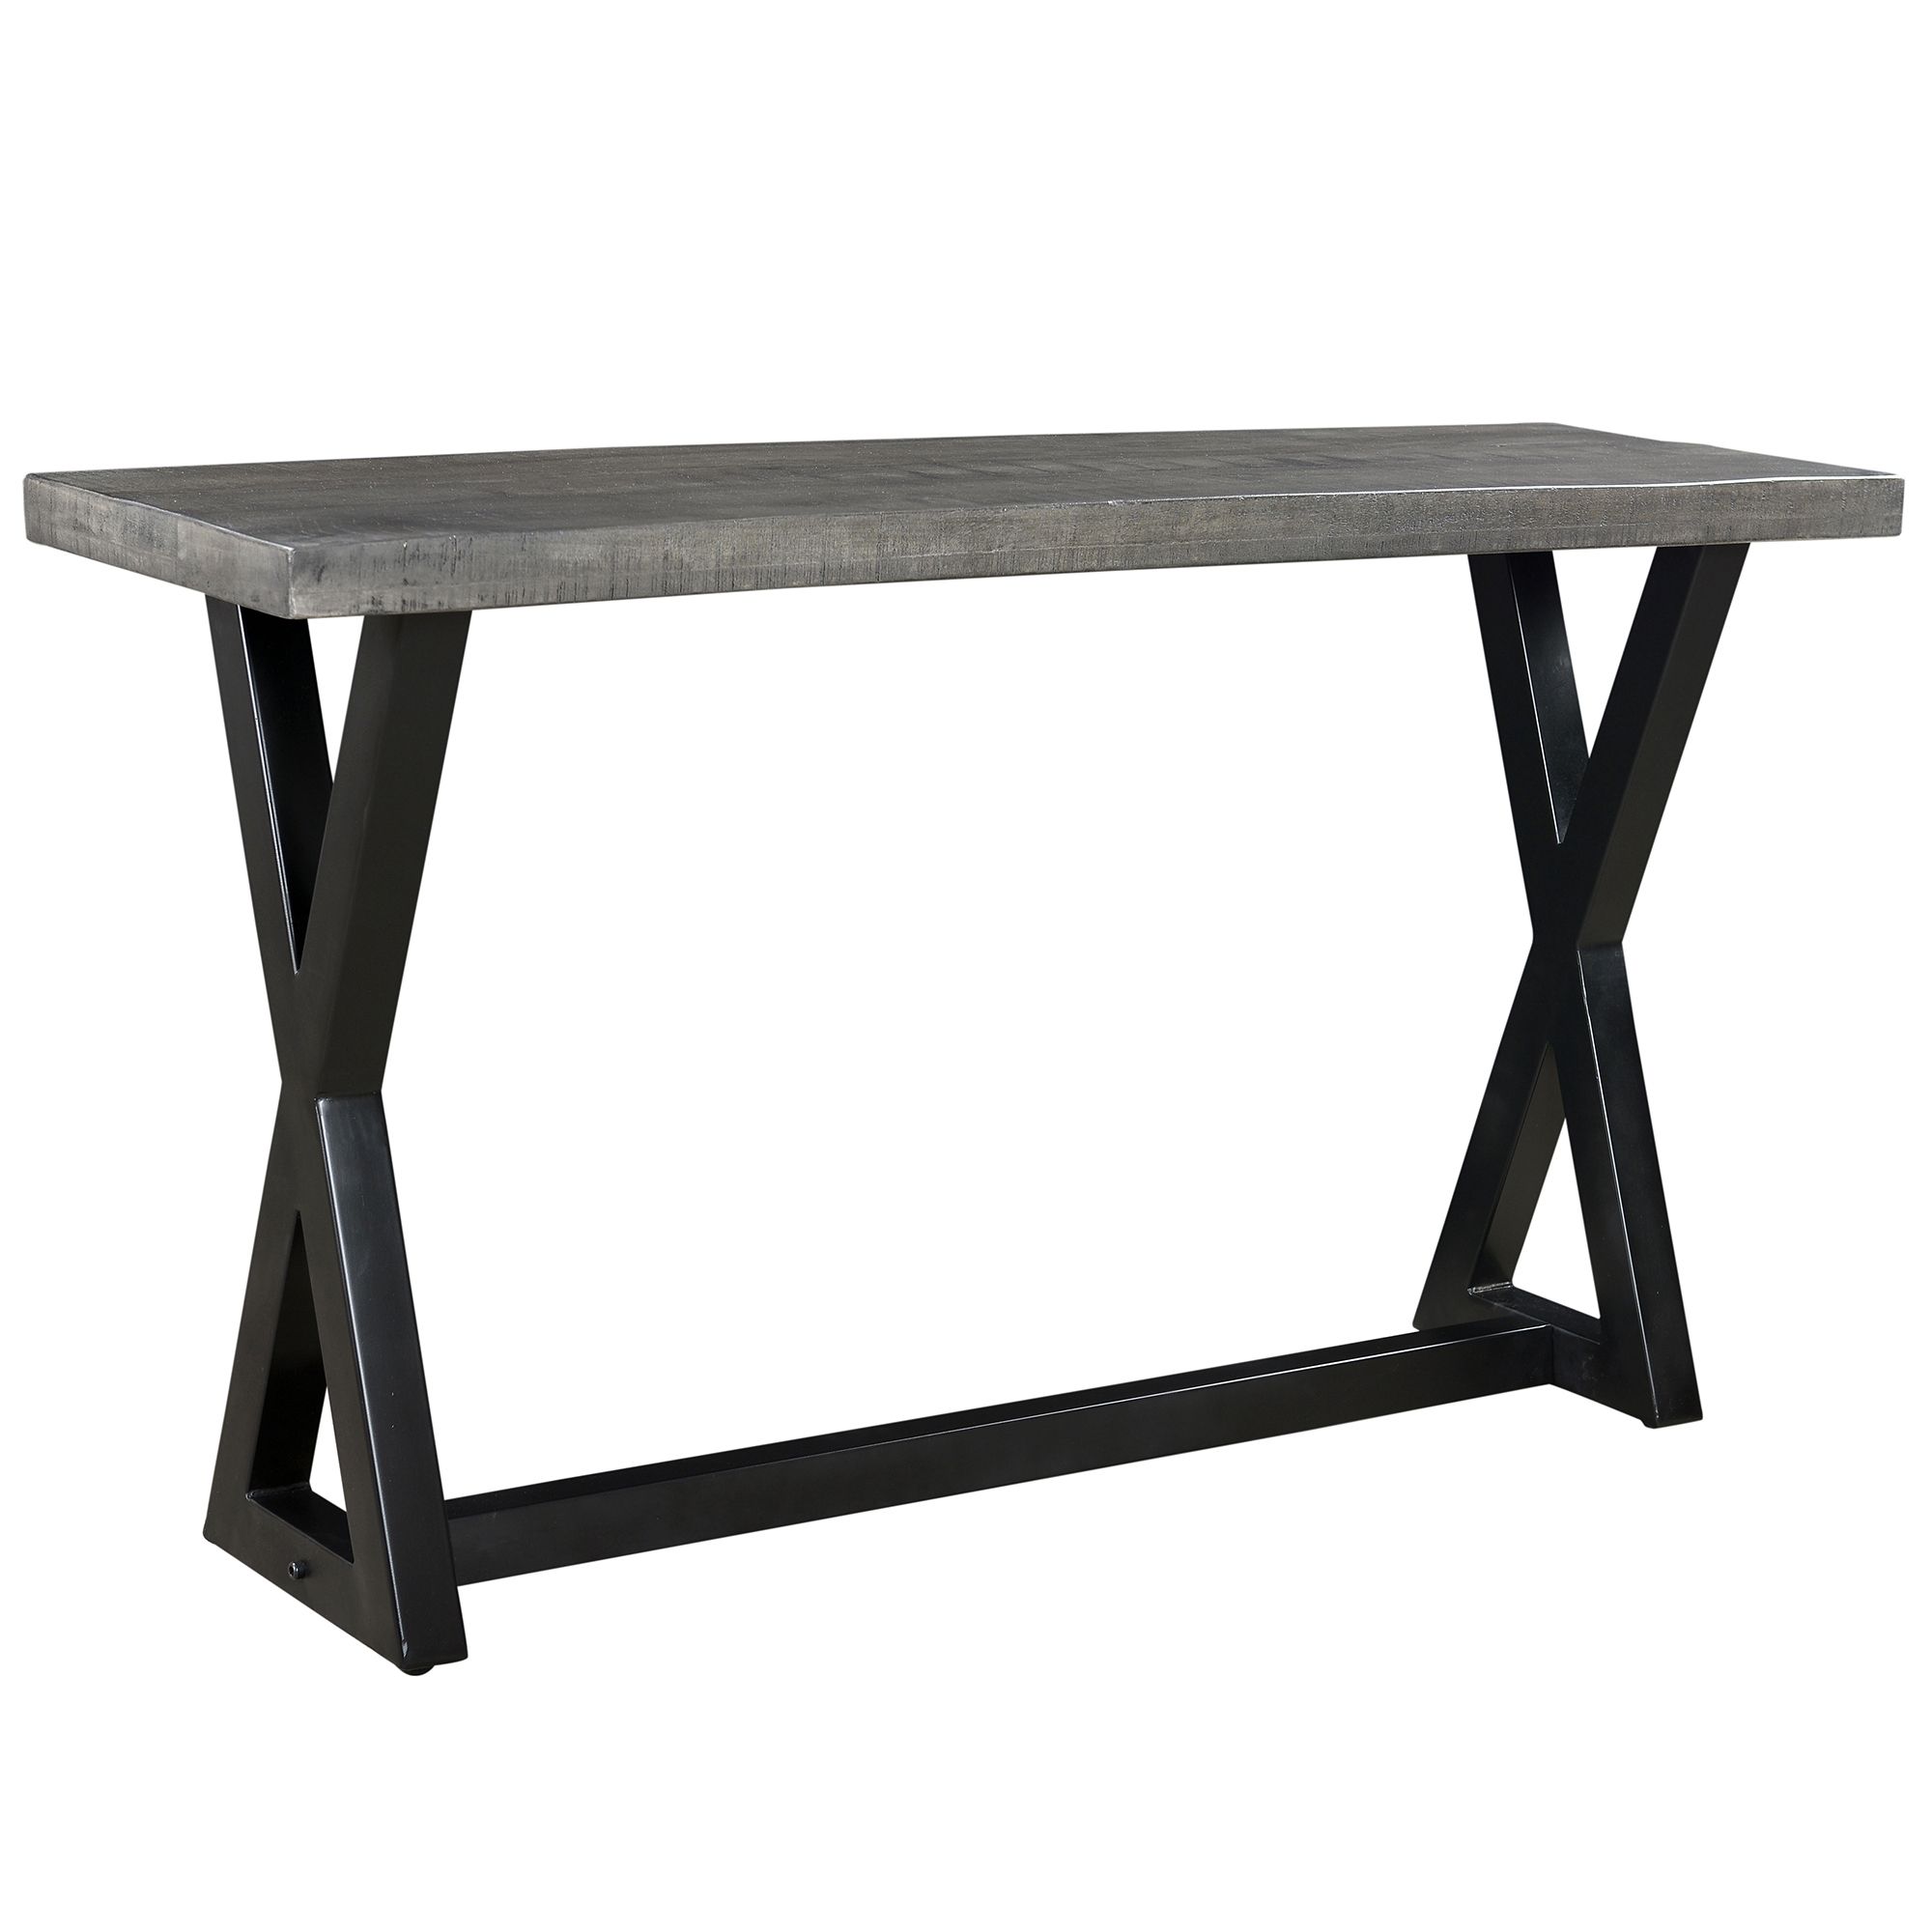 Zax Console Table In Distressed Grey – Aux Merveilles With Round Iron Console Tables (View 9 of 20)